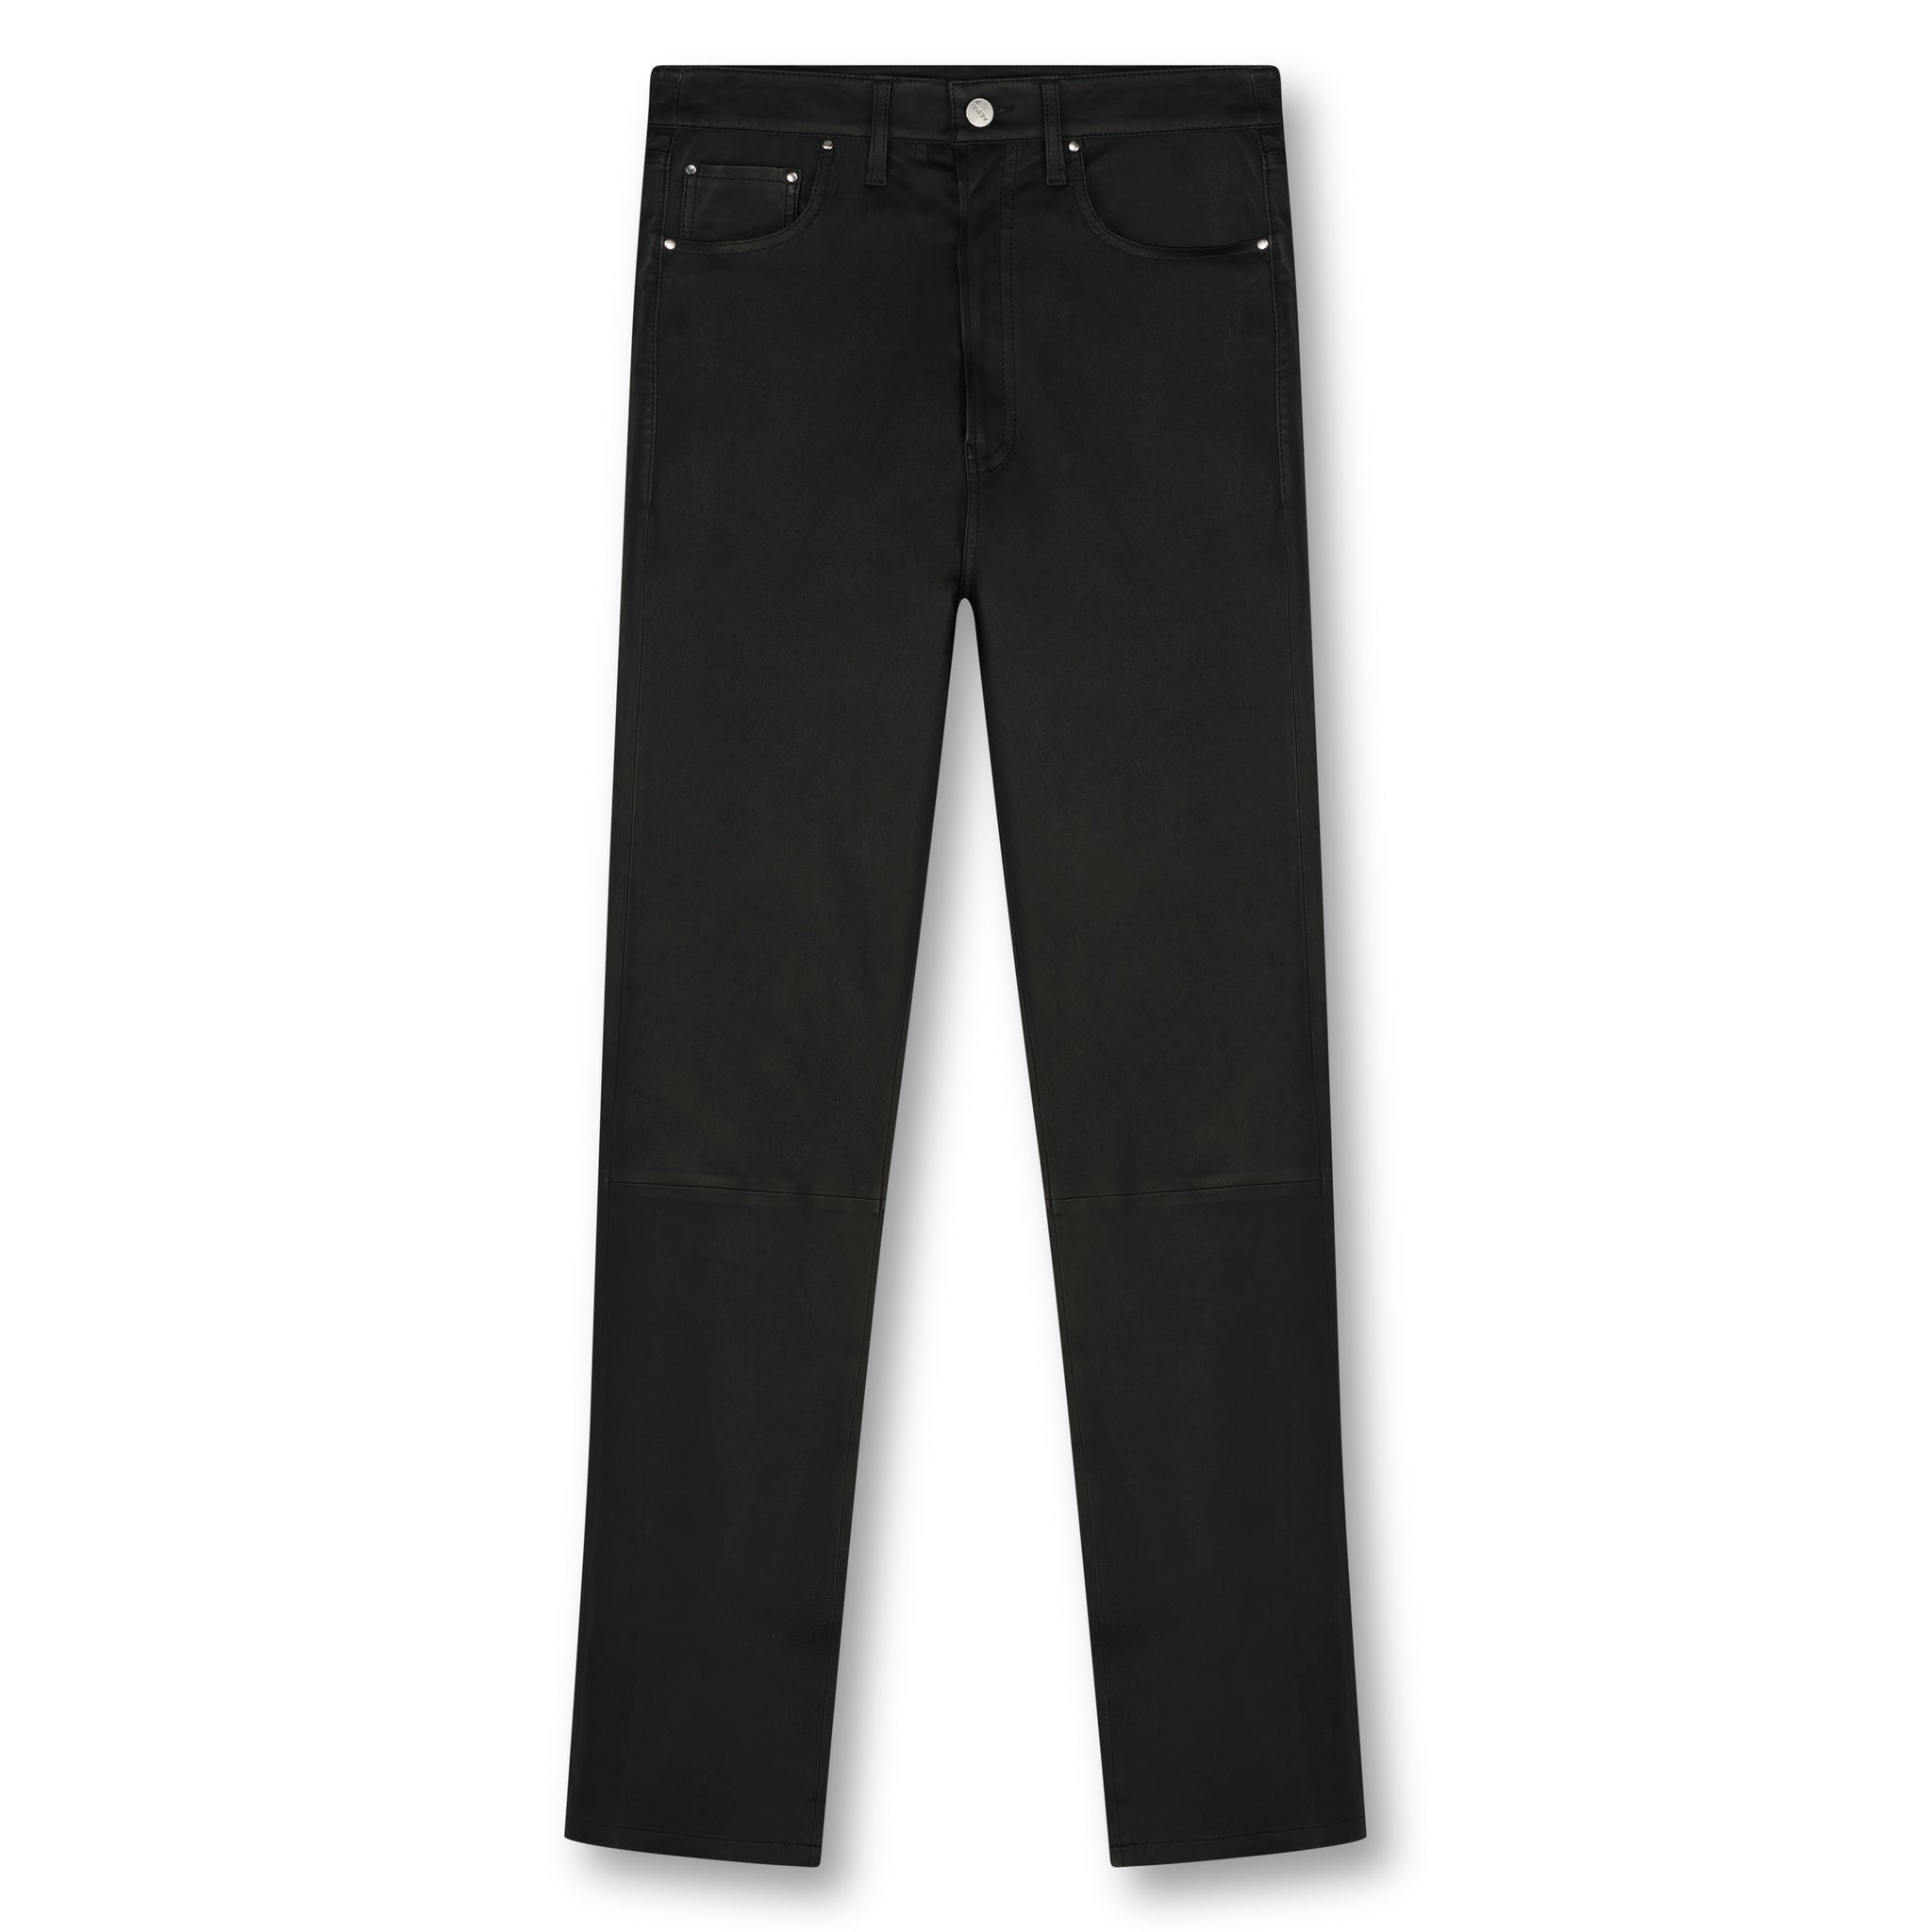 CREMONA | Leather stretch trousers